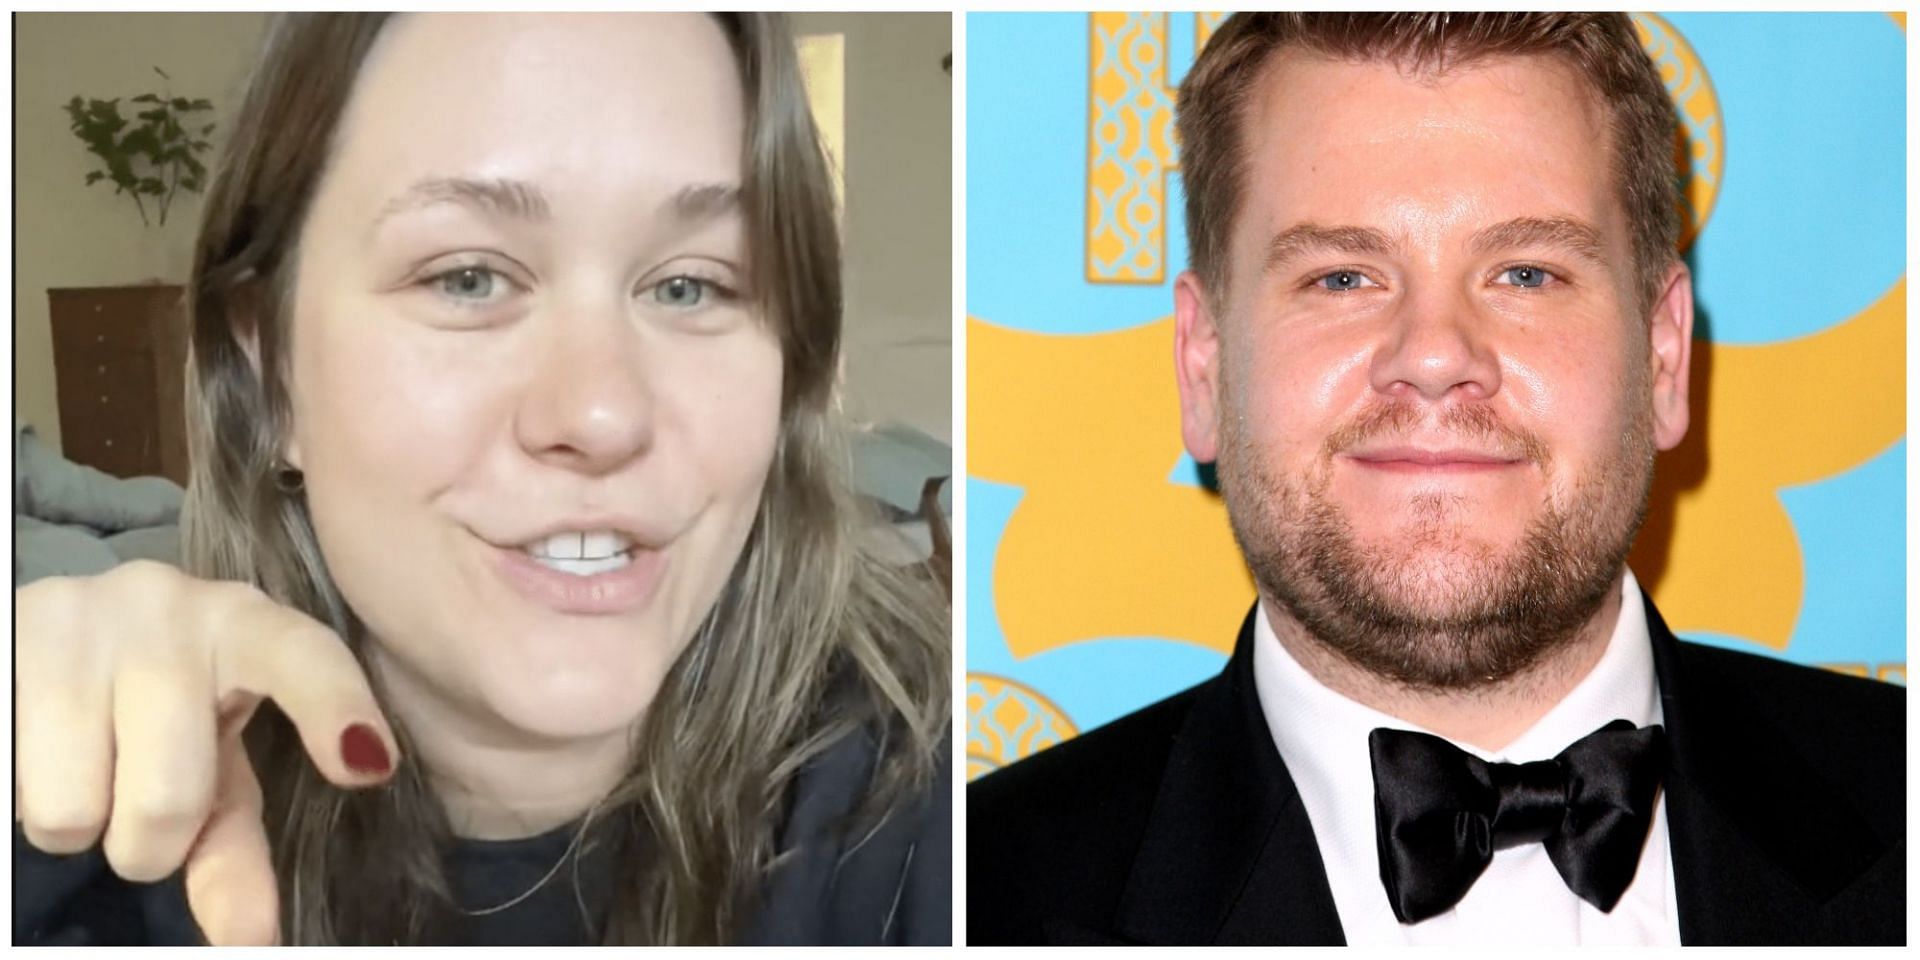 What did Becky say about James Corden? Details explored as former bashed the popular host on TikTok. (Image via TikTok)